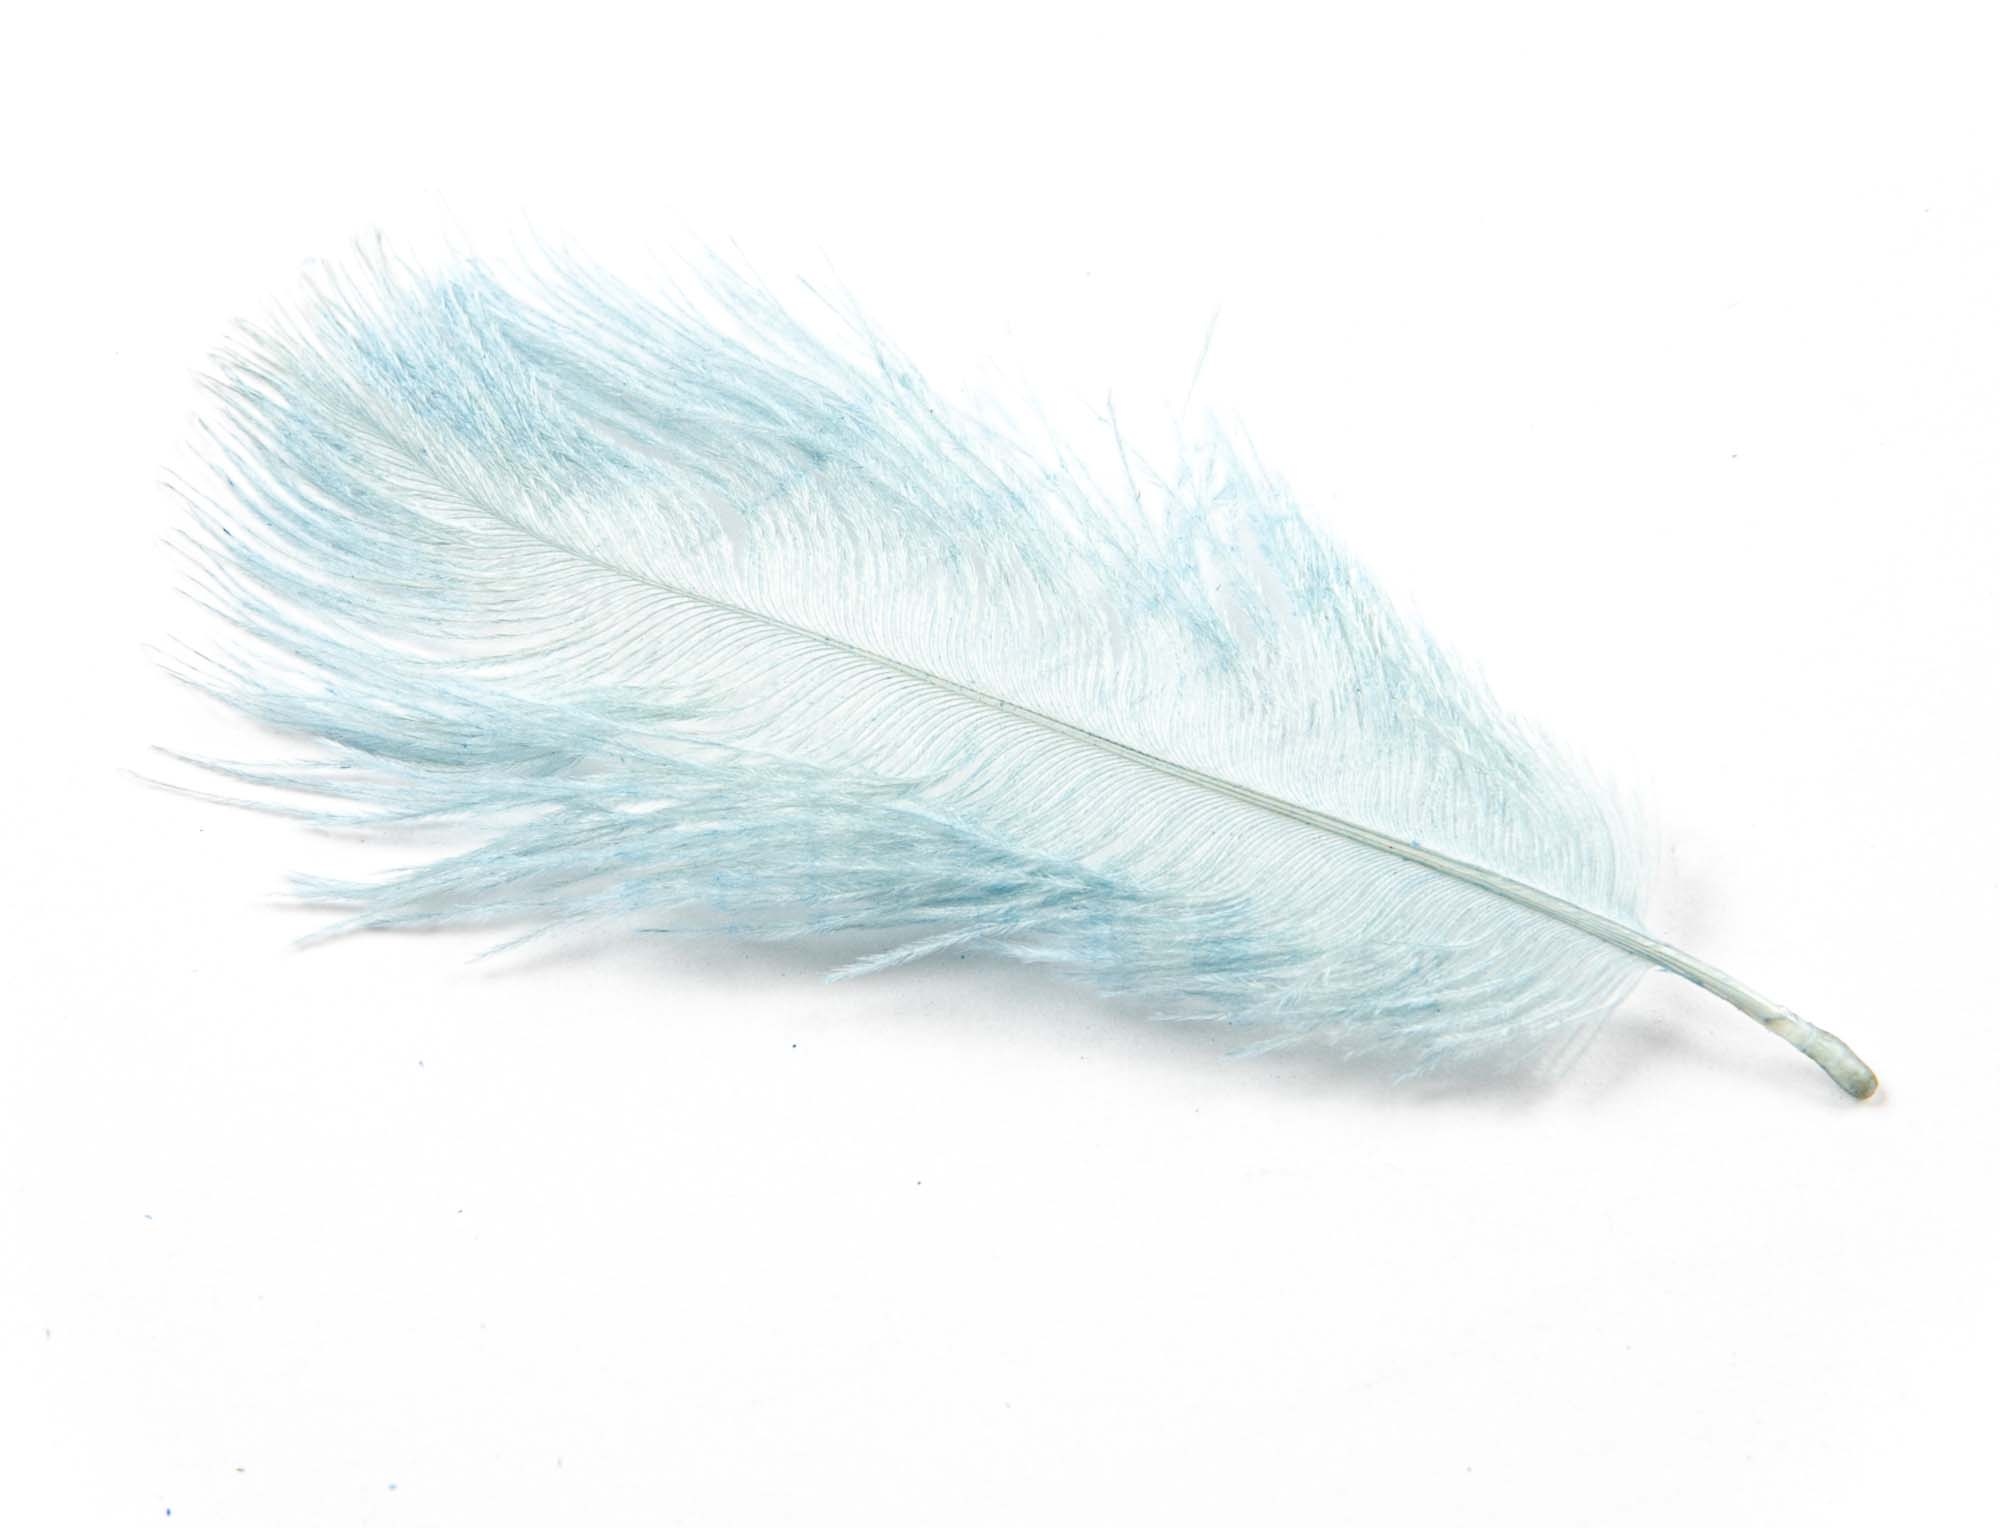 Feather: Ostrich plume, Once a highly valued commodity during the 19th century. 2000x1530 HD Wallpaper.